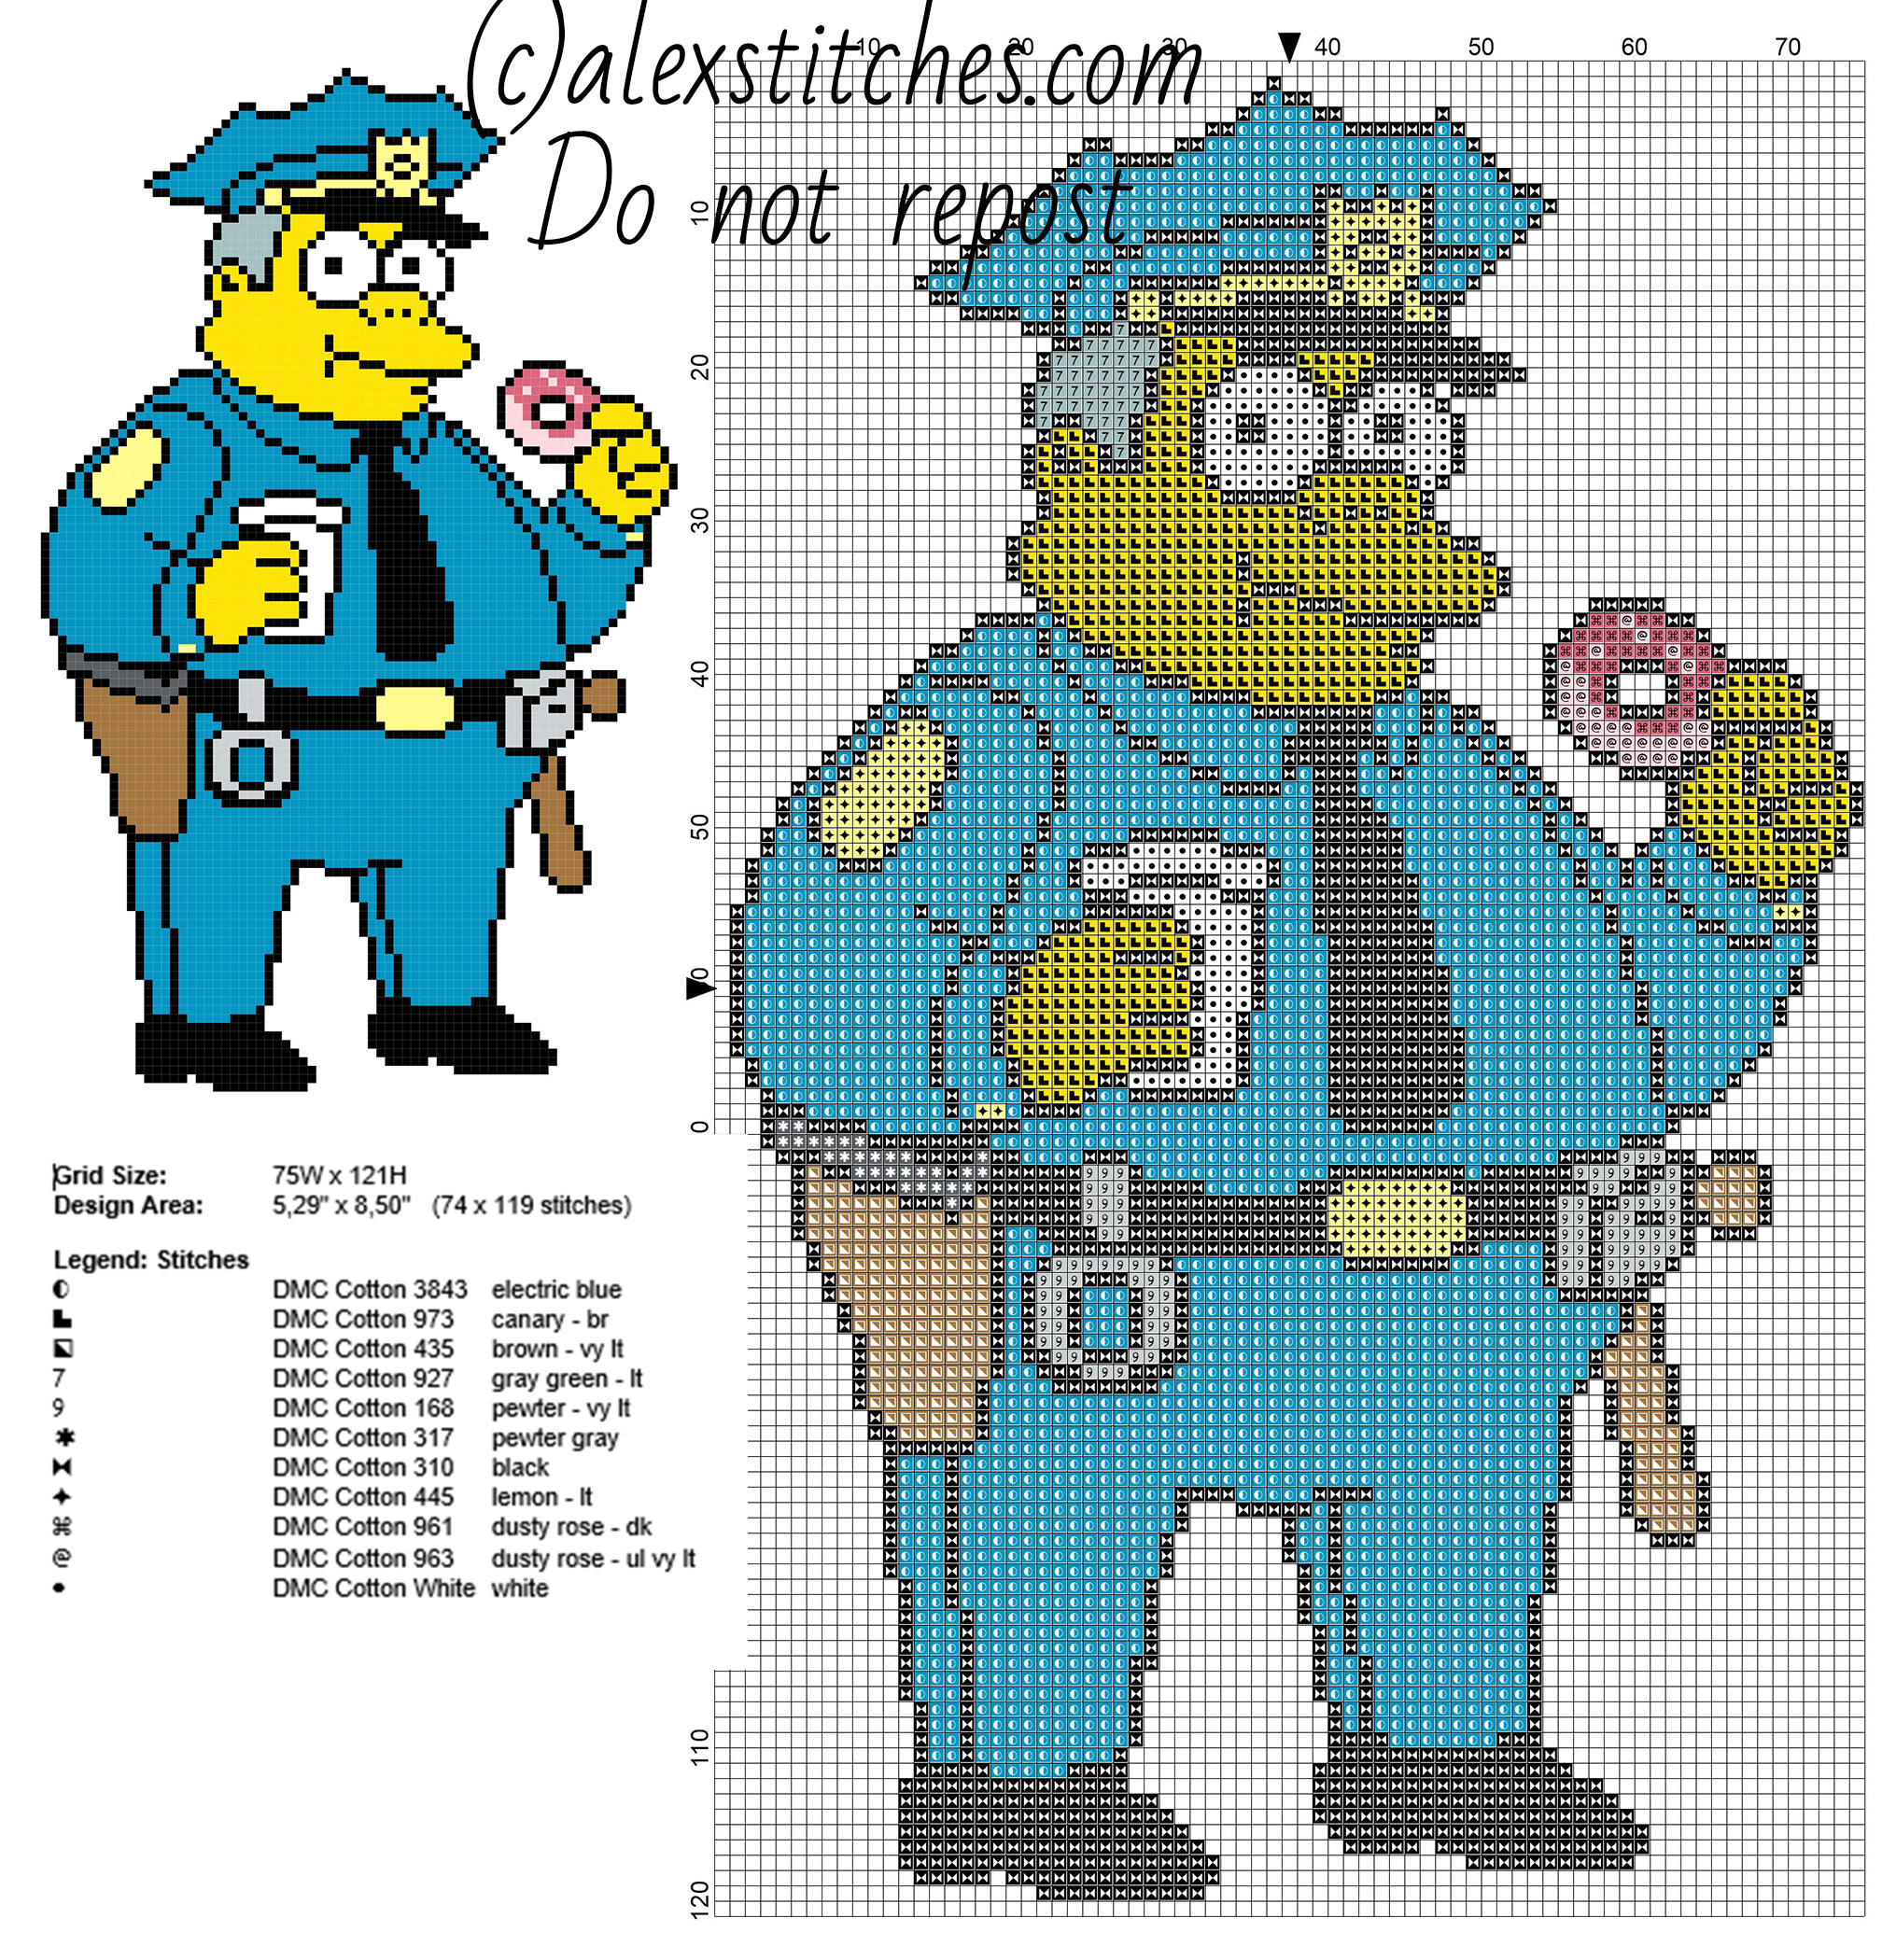 Chief Wiggum The Simpsons Family character free cross stitch pattern in 119 stitches